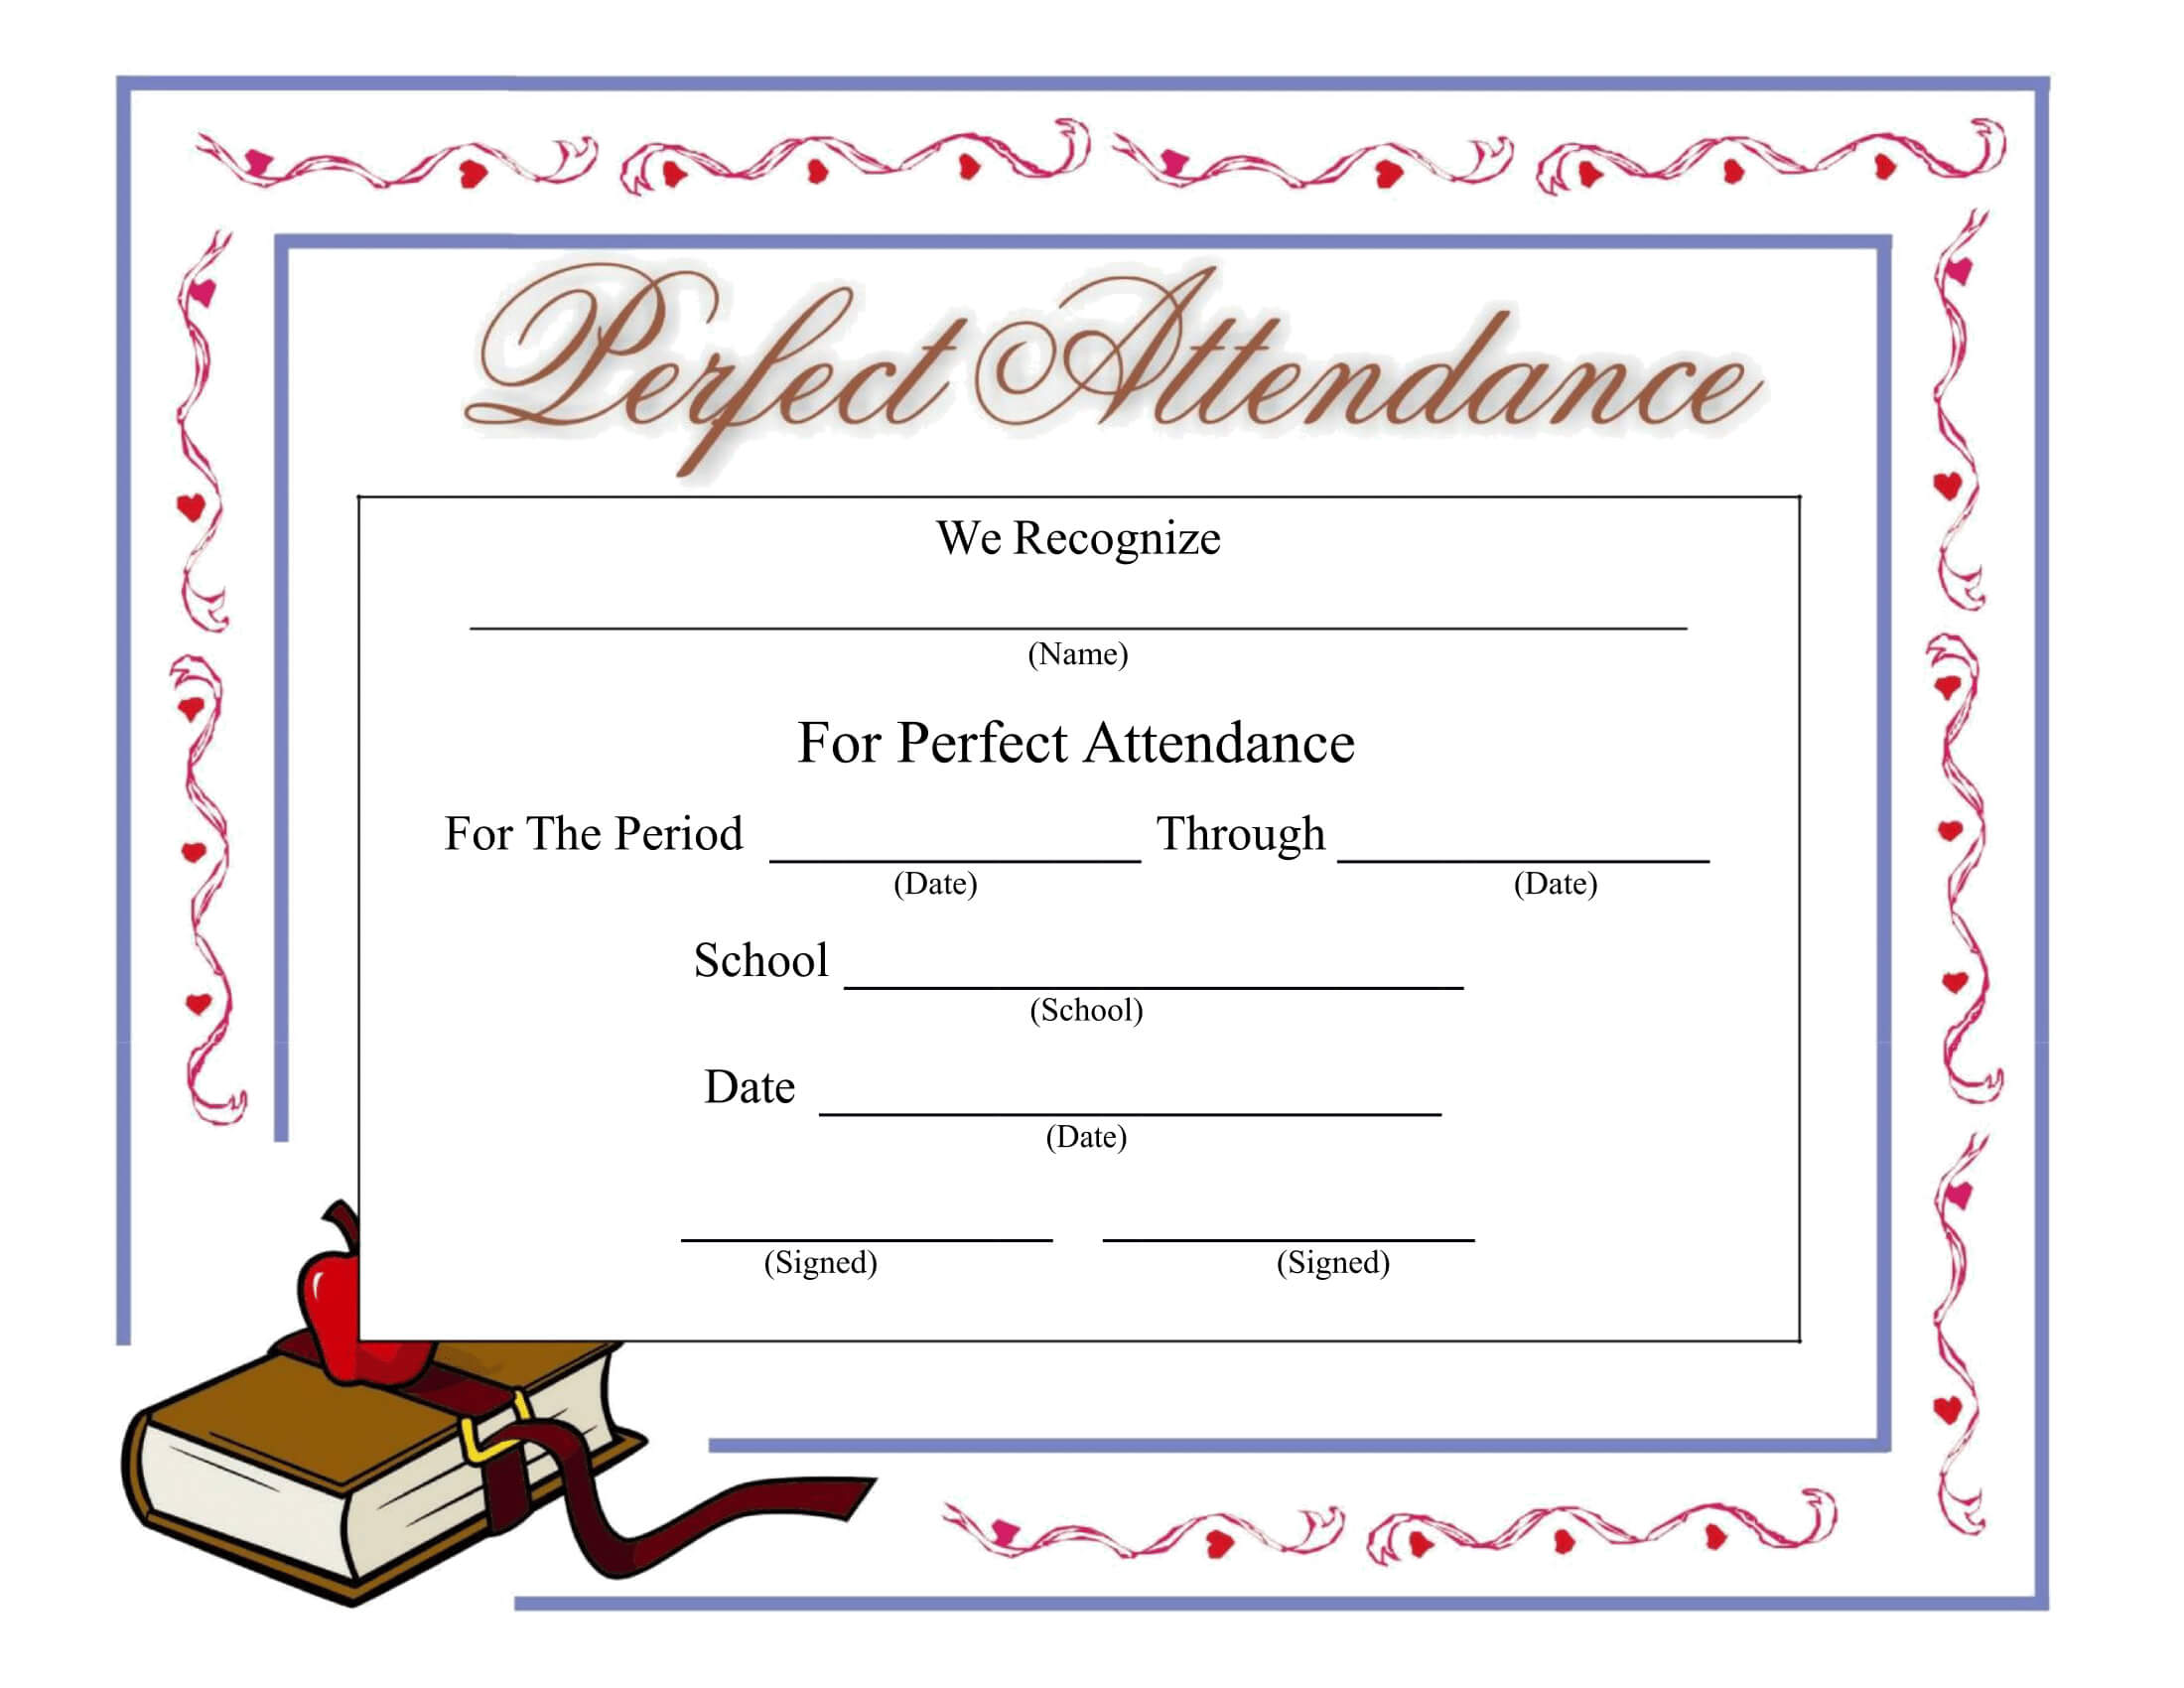 Perfect Attendance Certificate - Download A Free Template Within Perfect Attendance Certificate Template